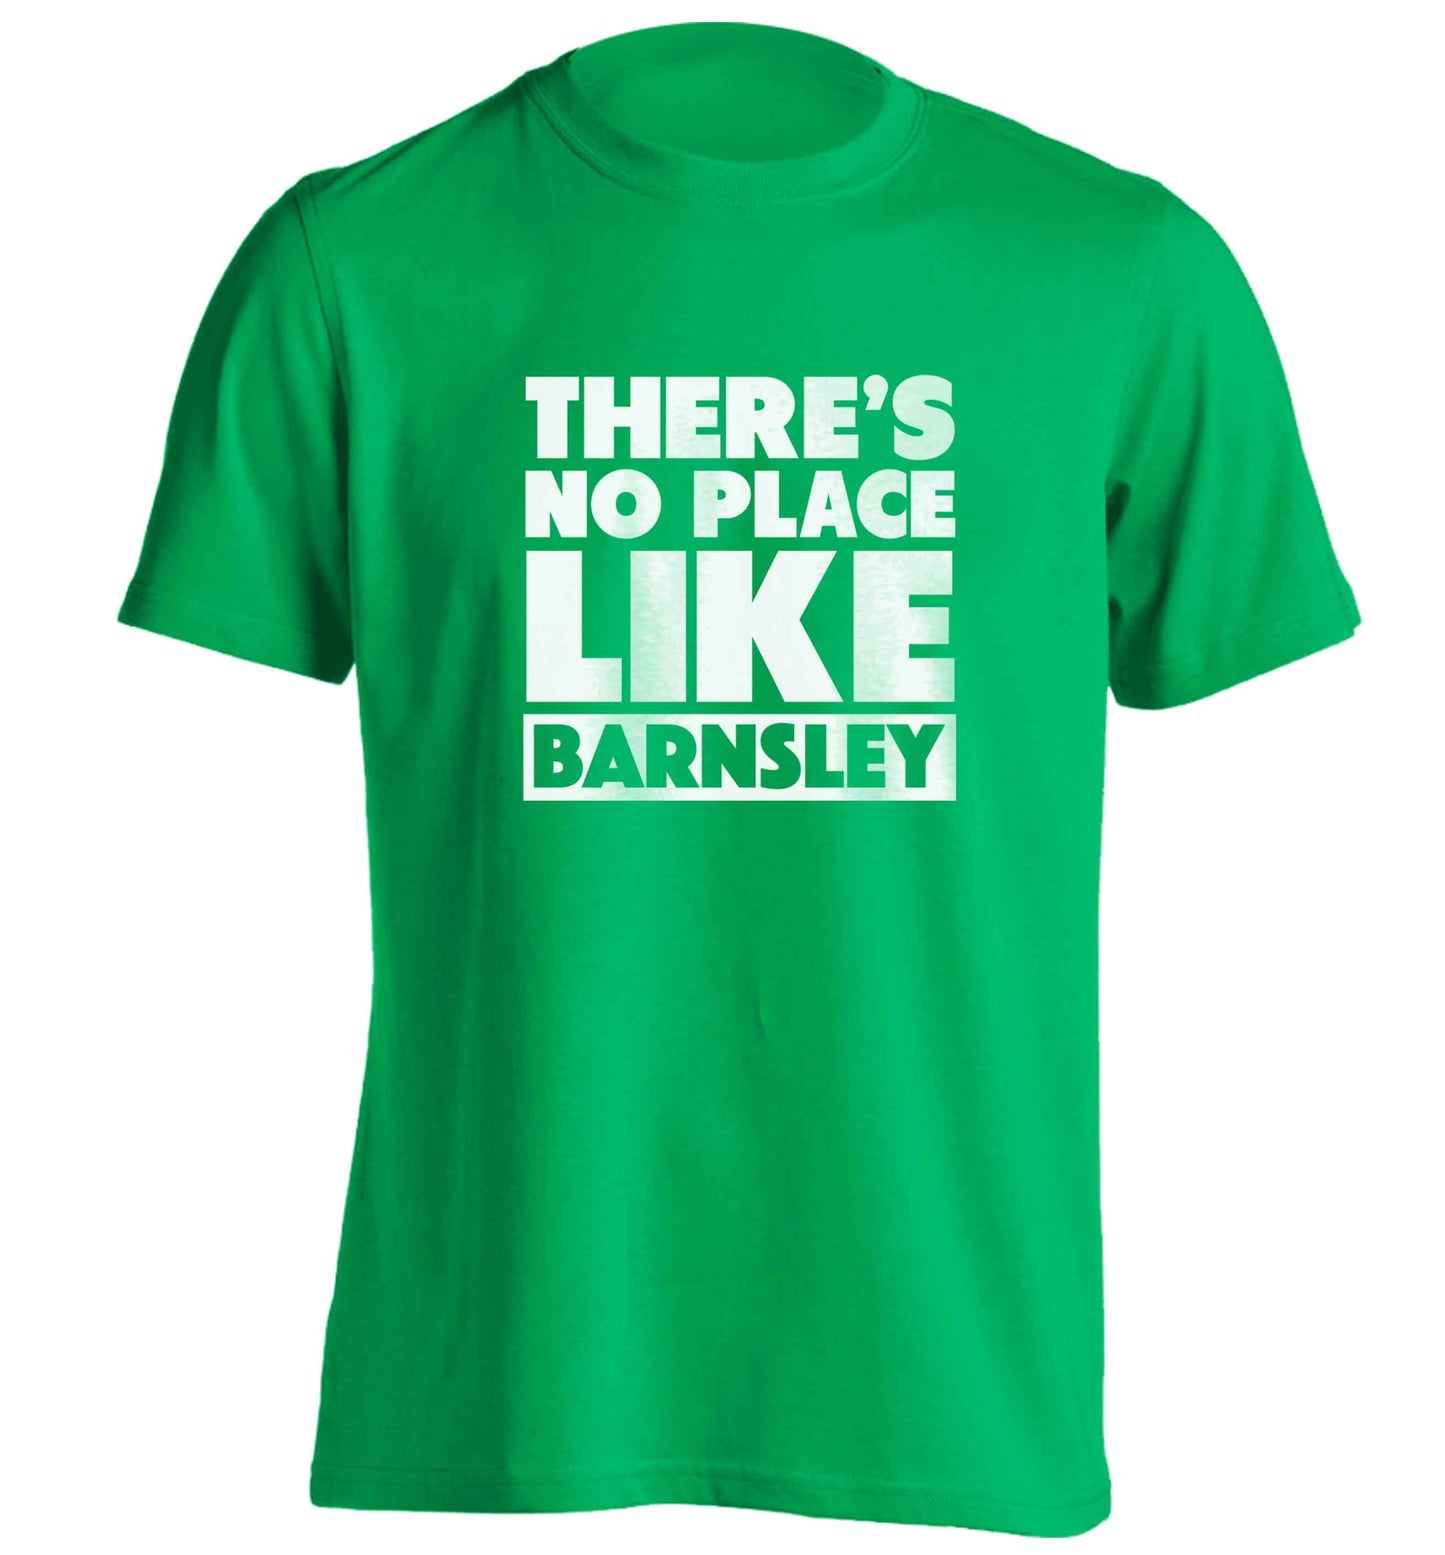 There's No Place Like Barnsley adults unisex green Tshirt 2XL